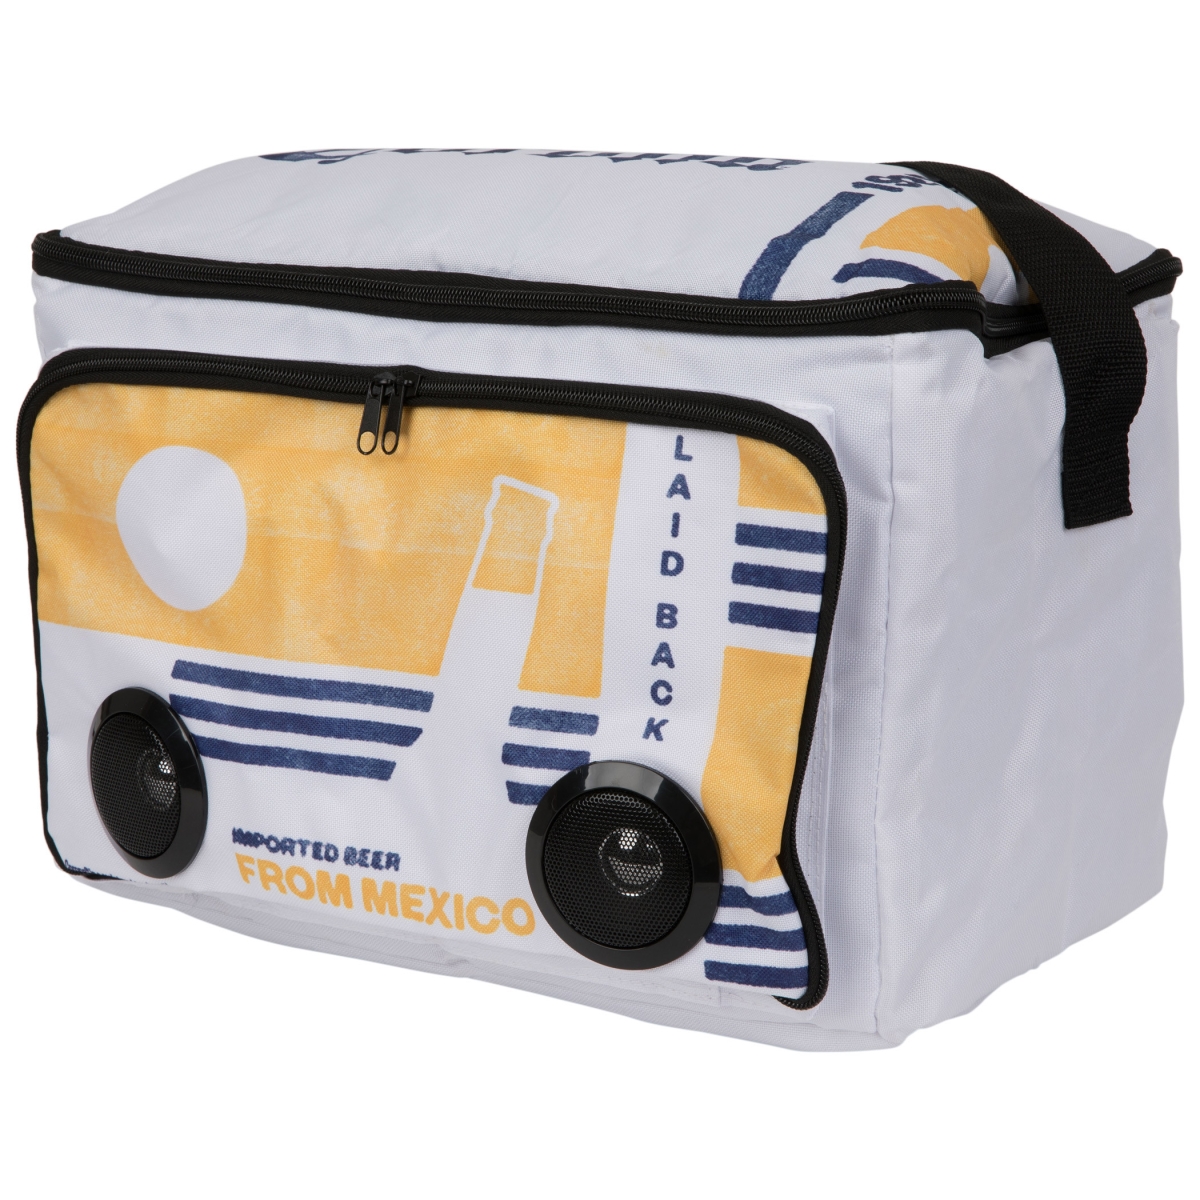 Picture of Corona Extra 861816 15.35 x 10.2 x 9 in. Corona Extra Beach Bottles Soft Cooler Bag with Bluetooth Speakers